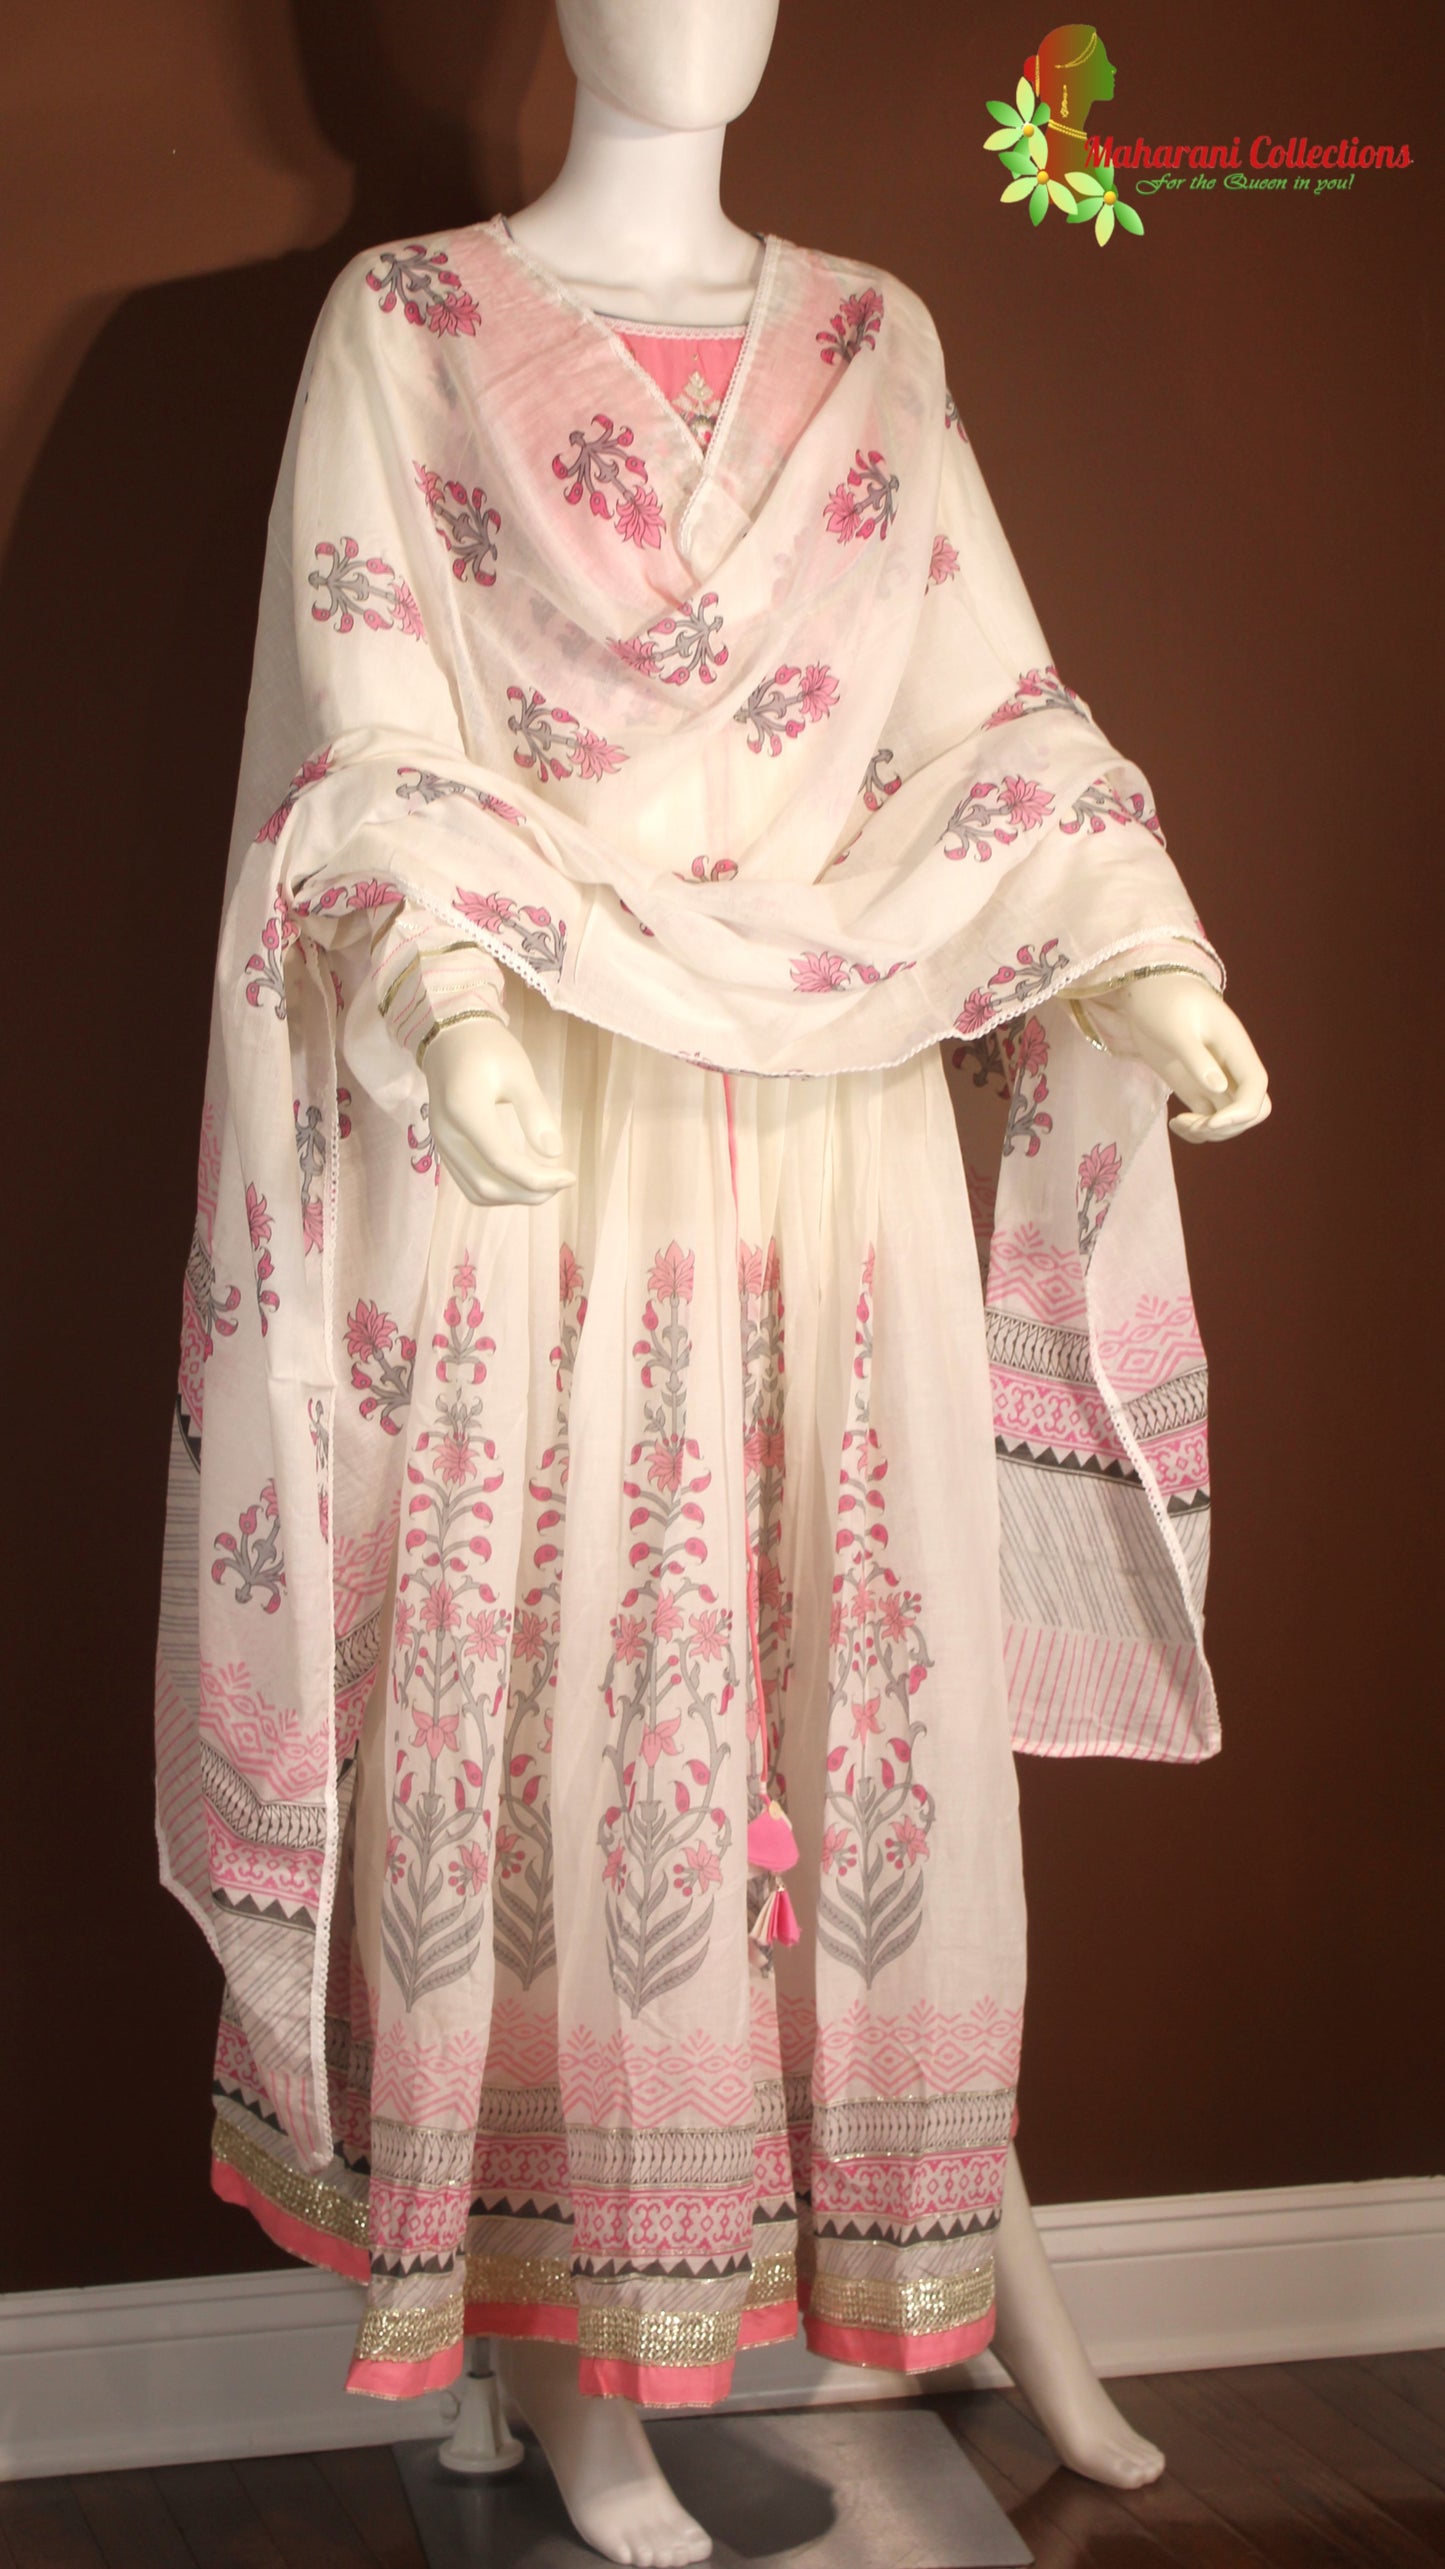 Maharani's Anarkali Suit - Soft Cotton - Pink and White (S, M, XL)